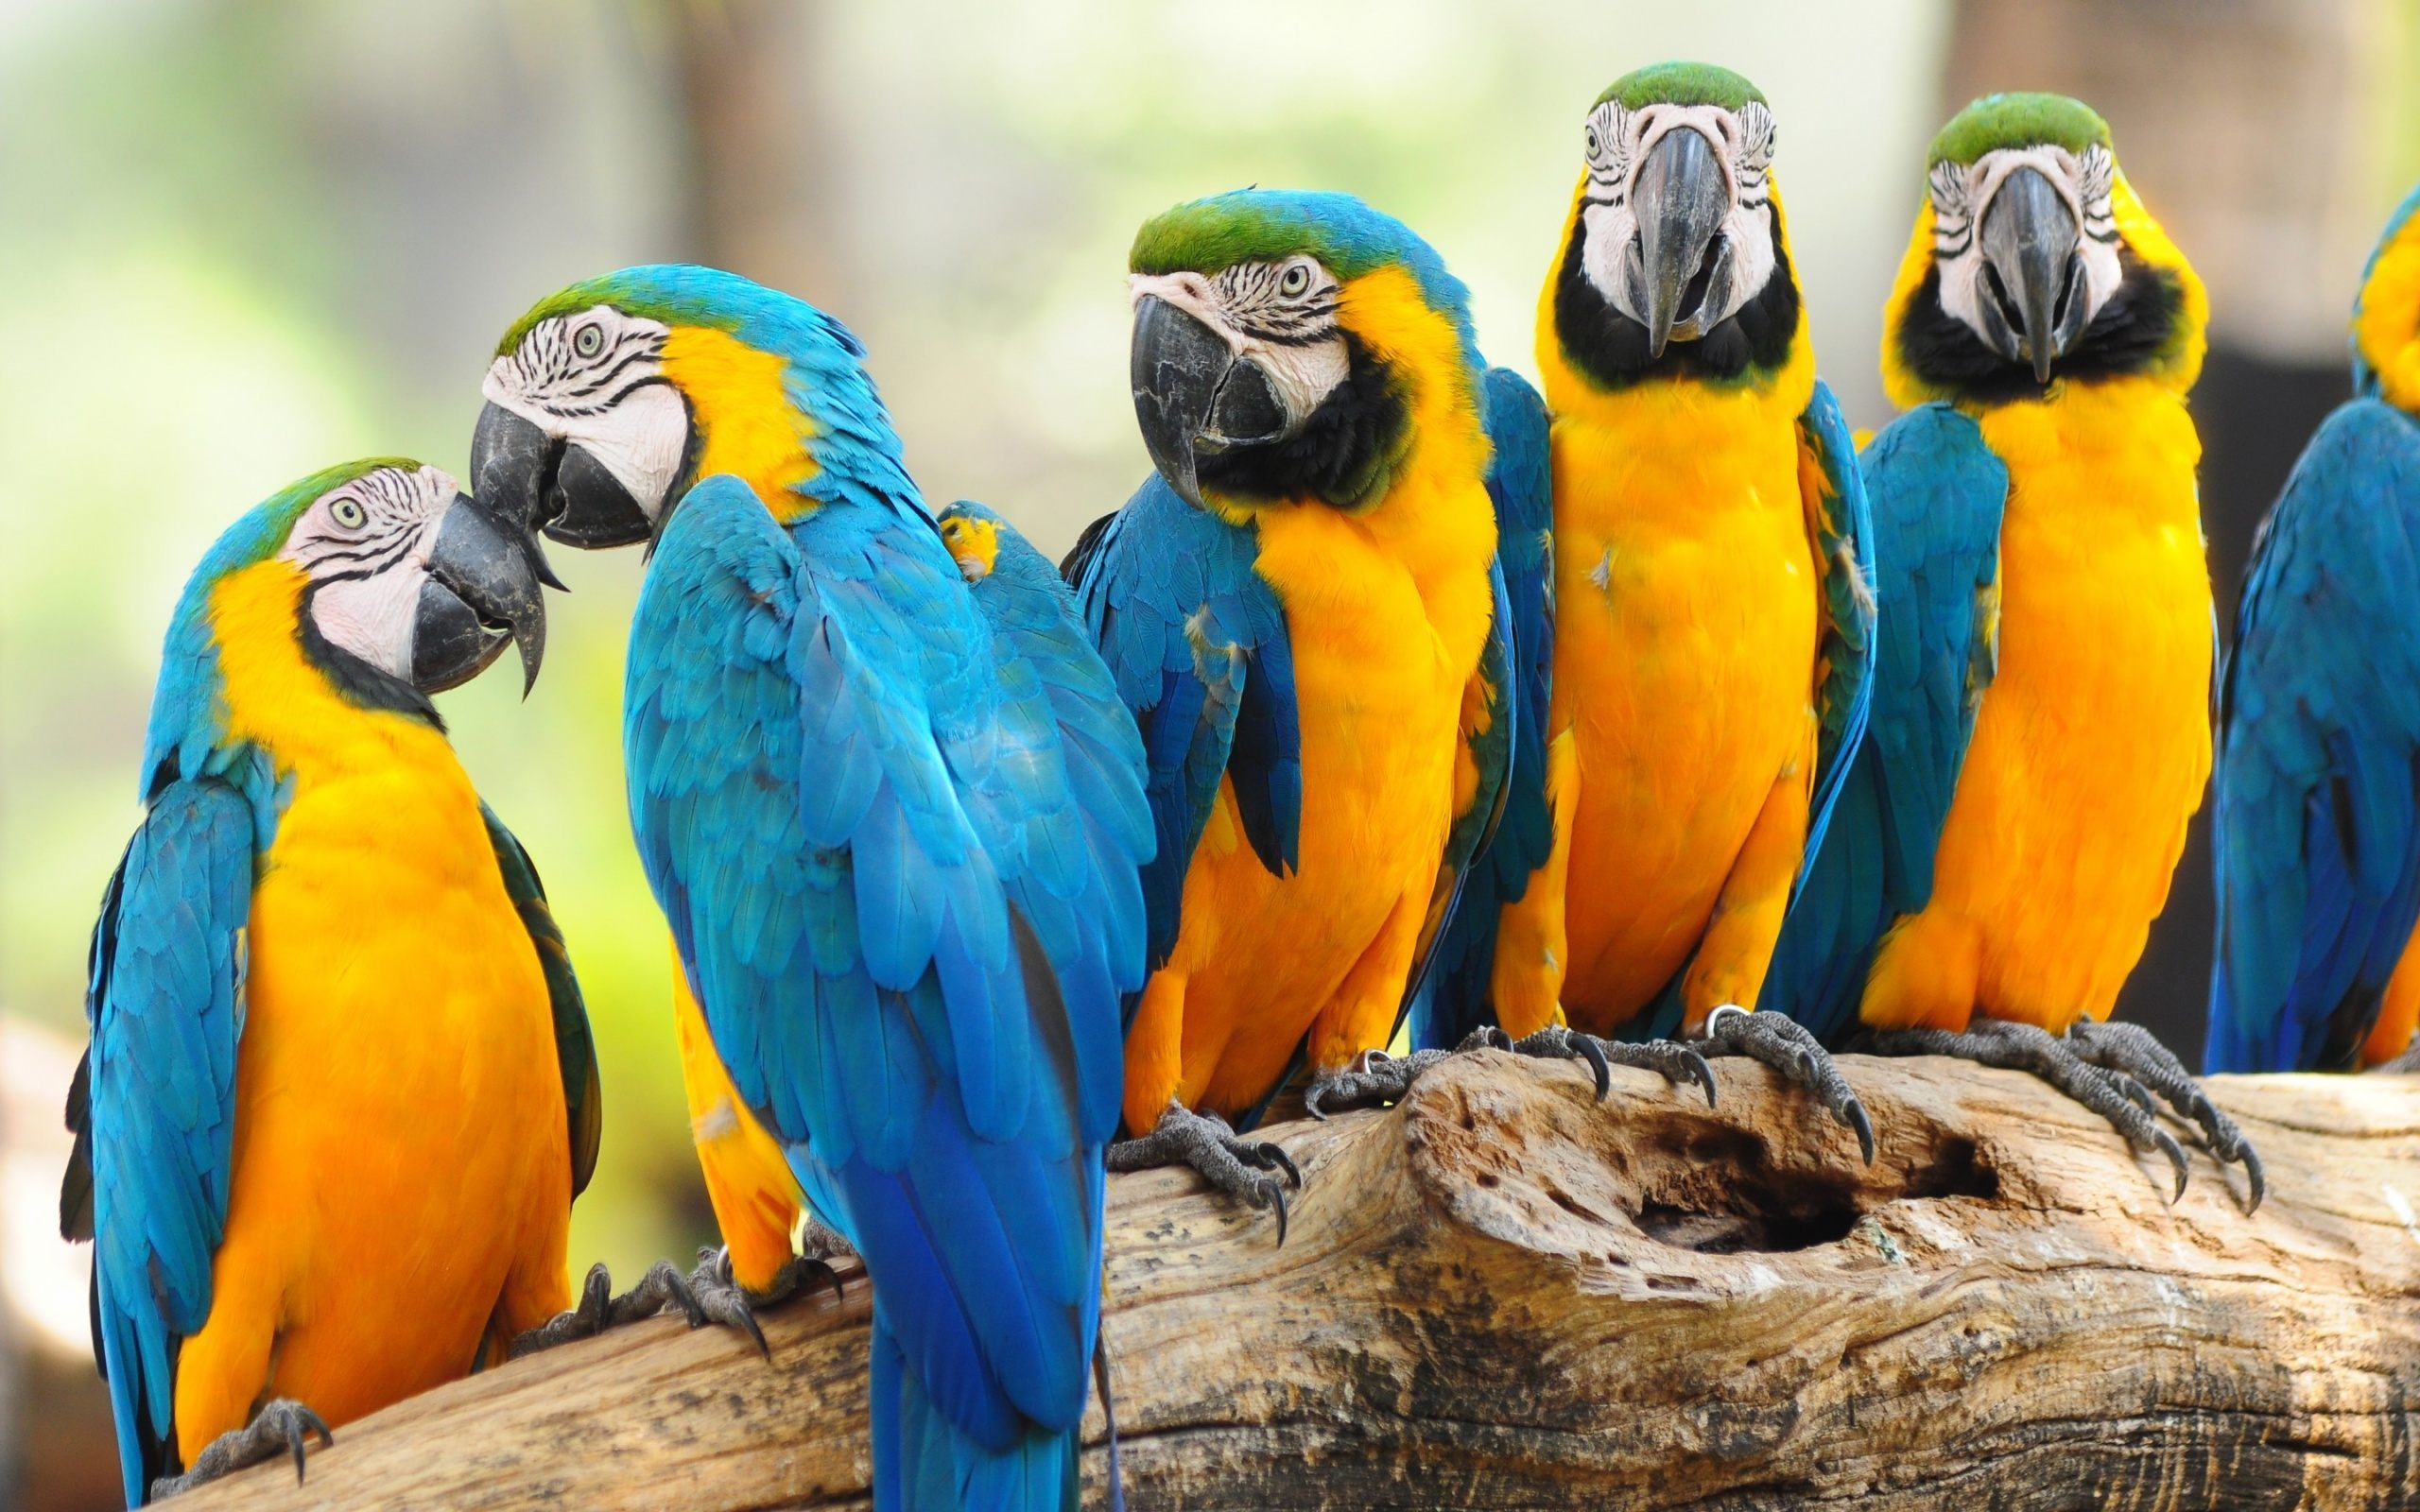 Australian Parrots HD Wallpaper for desktop and mobile in high resolution download. We have best collection of Colorful. Parrot wallpaper, Beautiful birds, Parrot